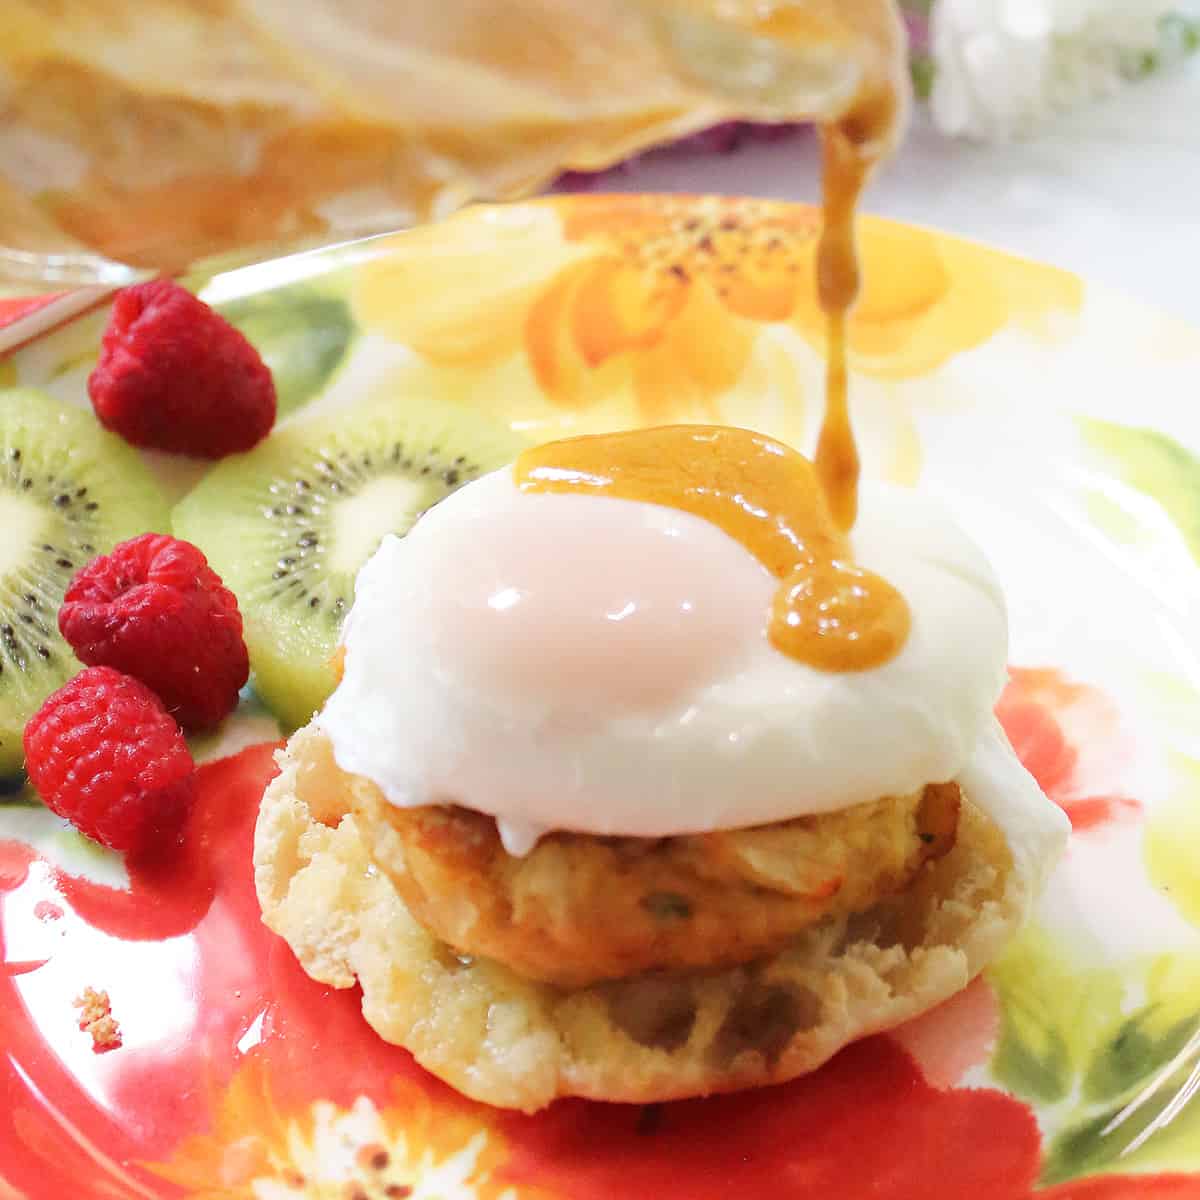 Drizzle eggs benedict sauce over finished crab cake benedict.